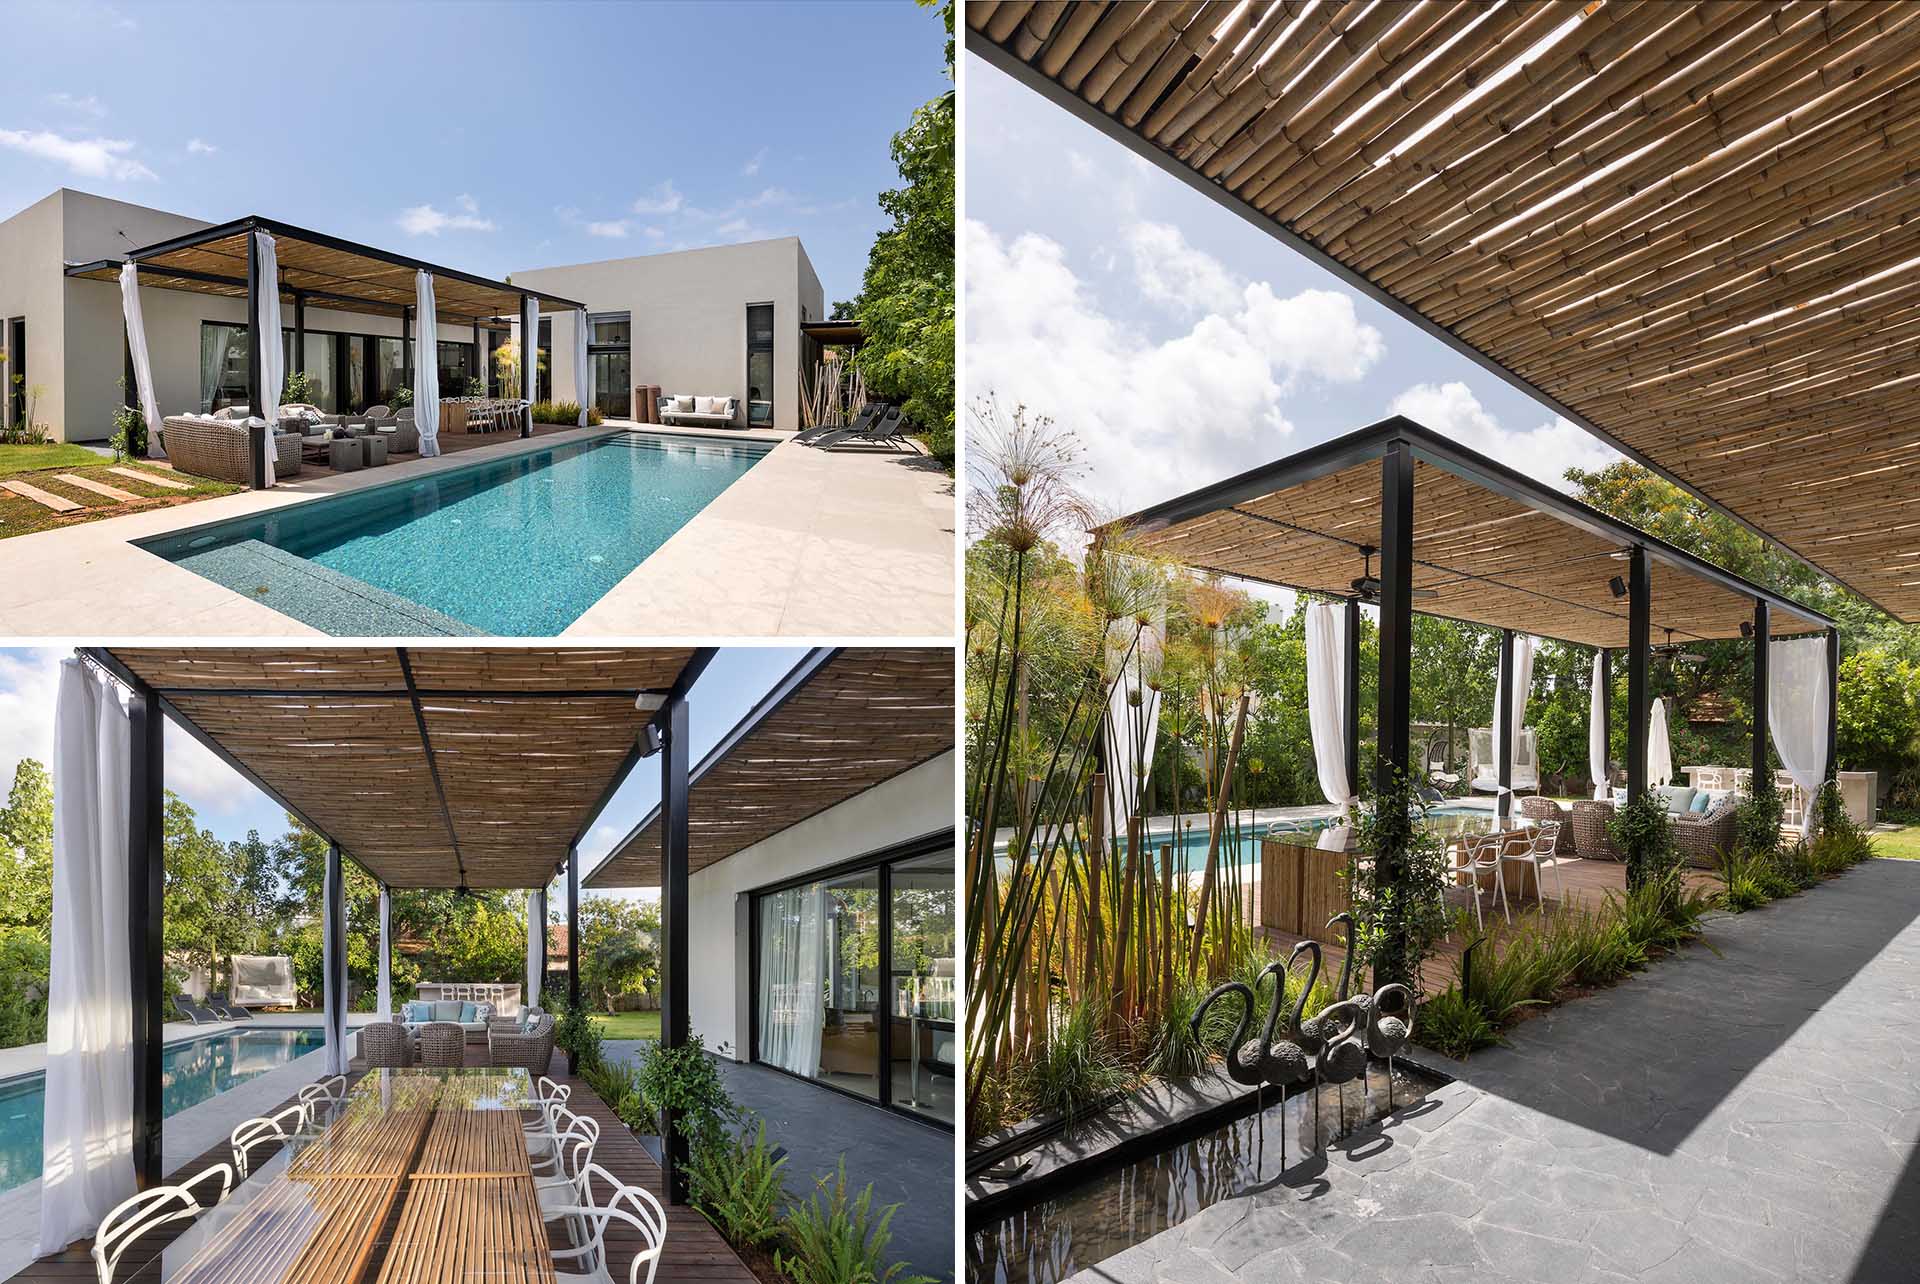 A modern house with a bamboo pergola that shades an outdoor living and dining area.